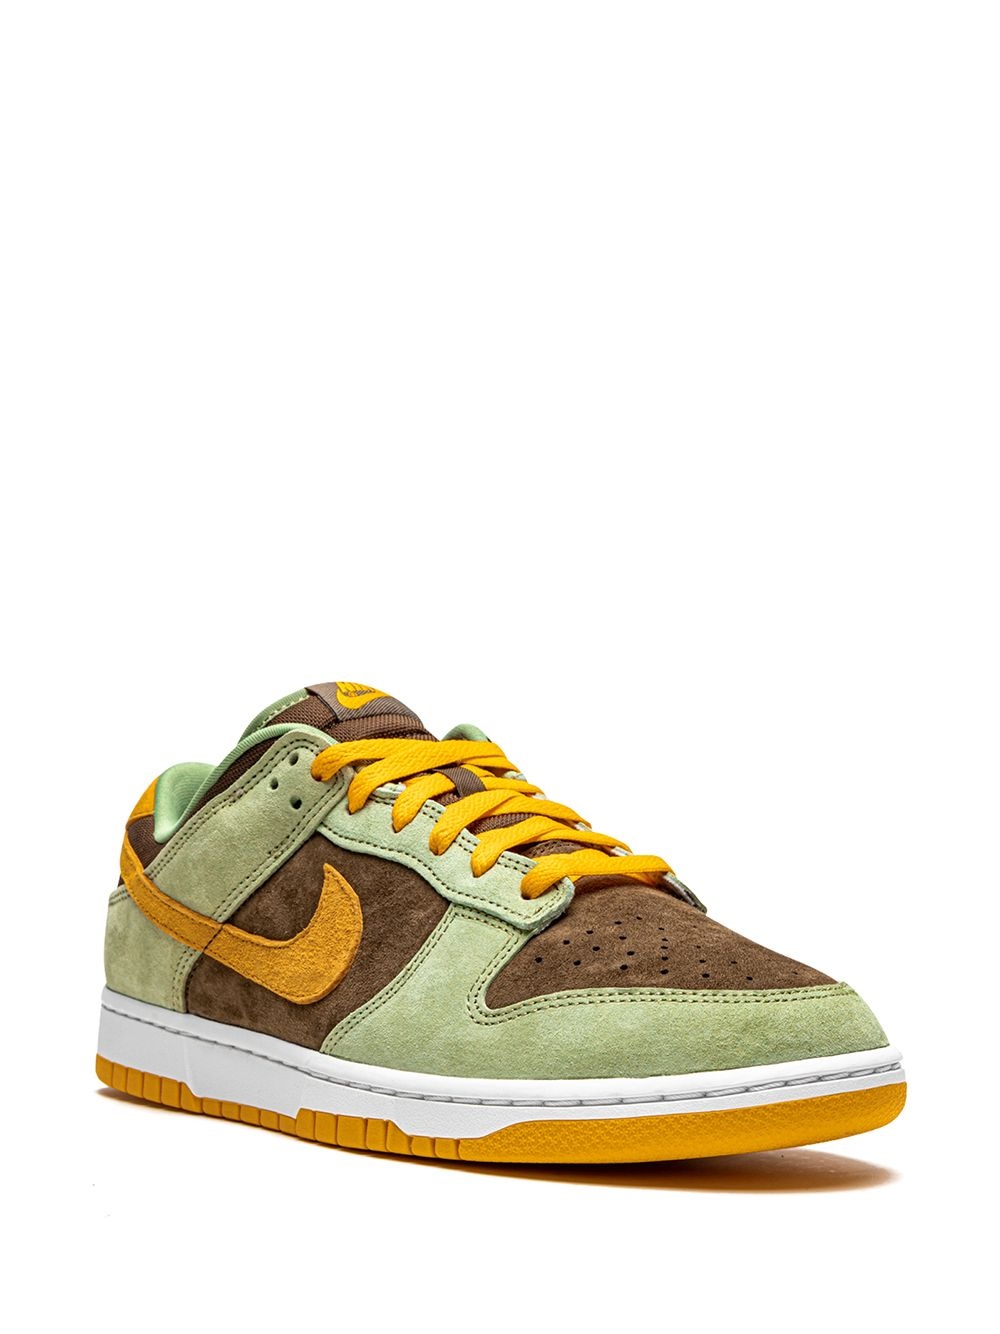 Dunk Low "Dusty Olive" sneakers - 2